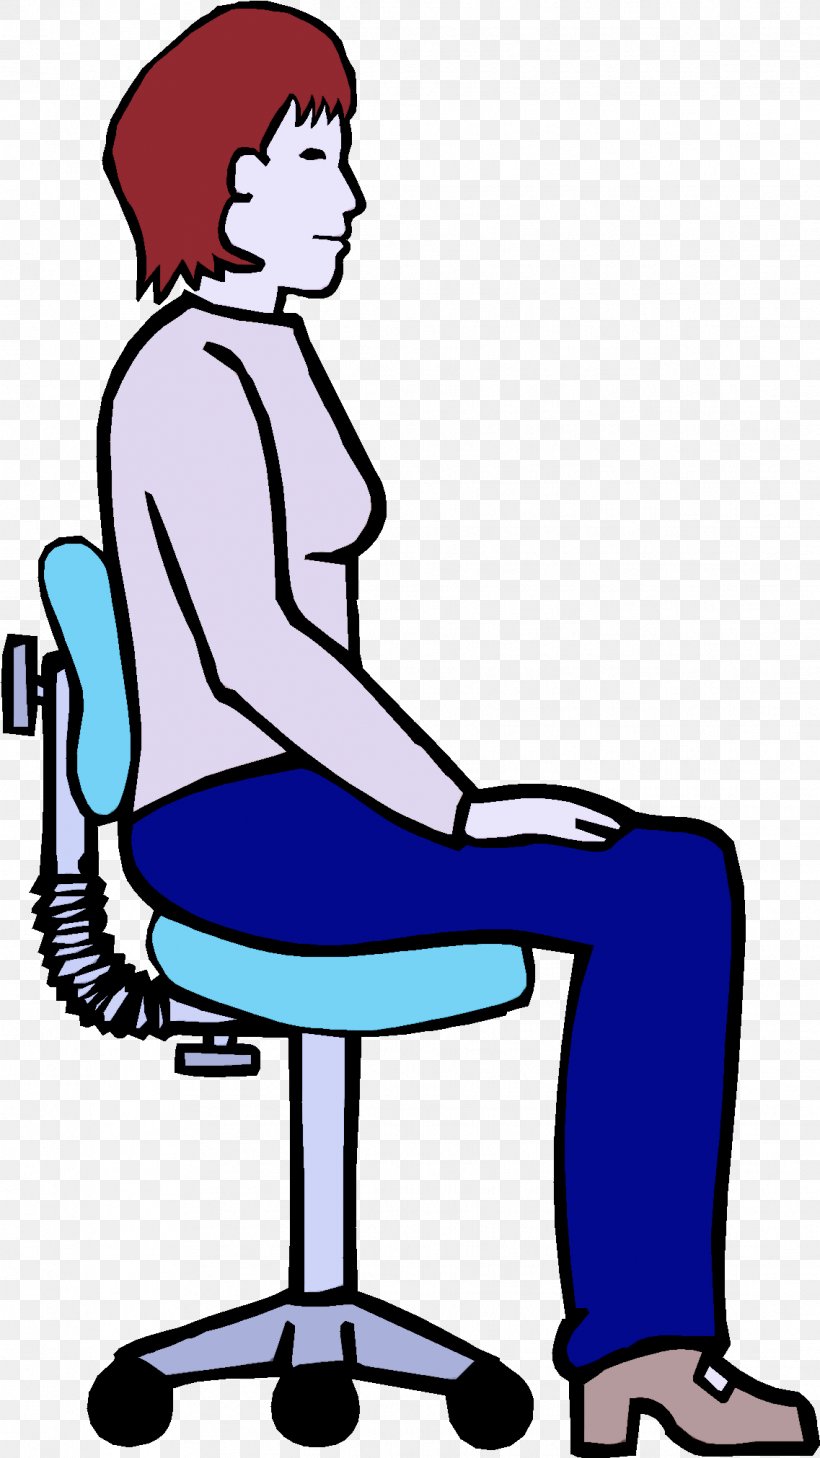 Sitting Clip Art Chair Furniture Office Chair, PNG, 1137x2022px, Sitting, Chair, Furniture, Leg, Office Chair Download Free